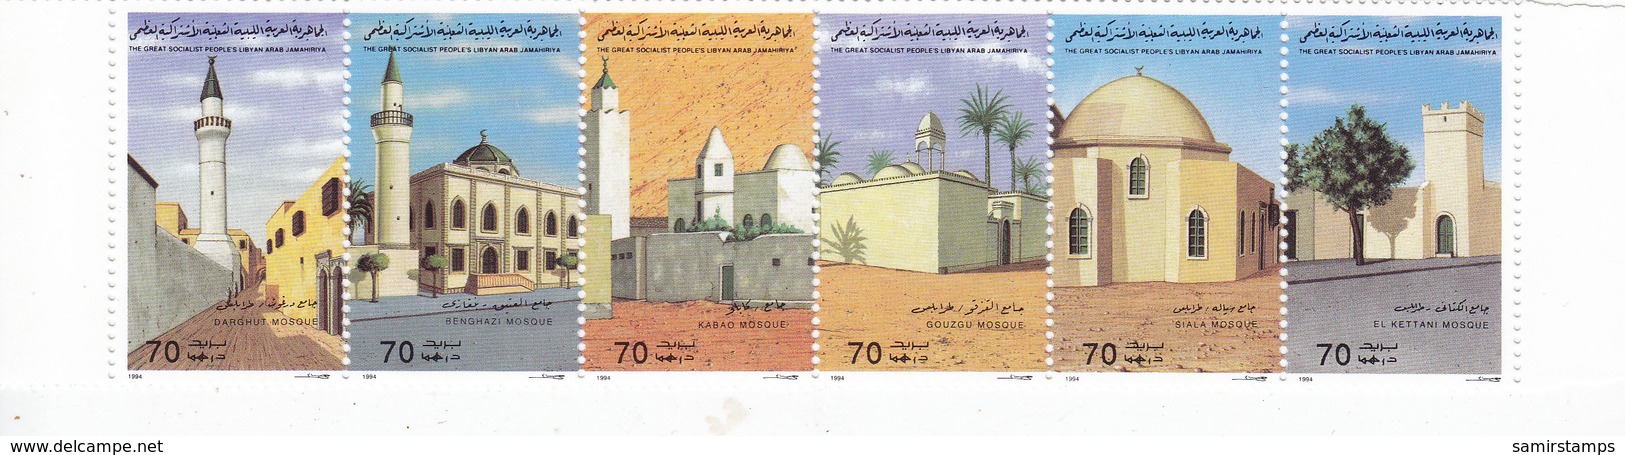 Libya 1984 Mosques Strip Of 6 Stamps Complete Set MNH- Reduced Price - SKRILL PAY ONLY - Libië